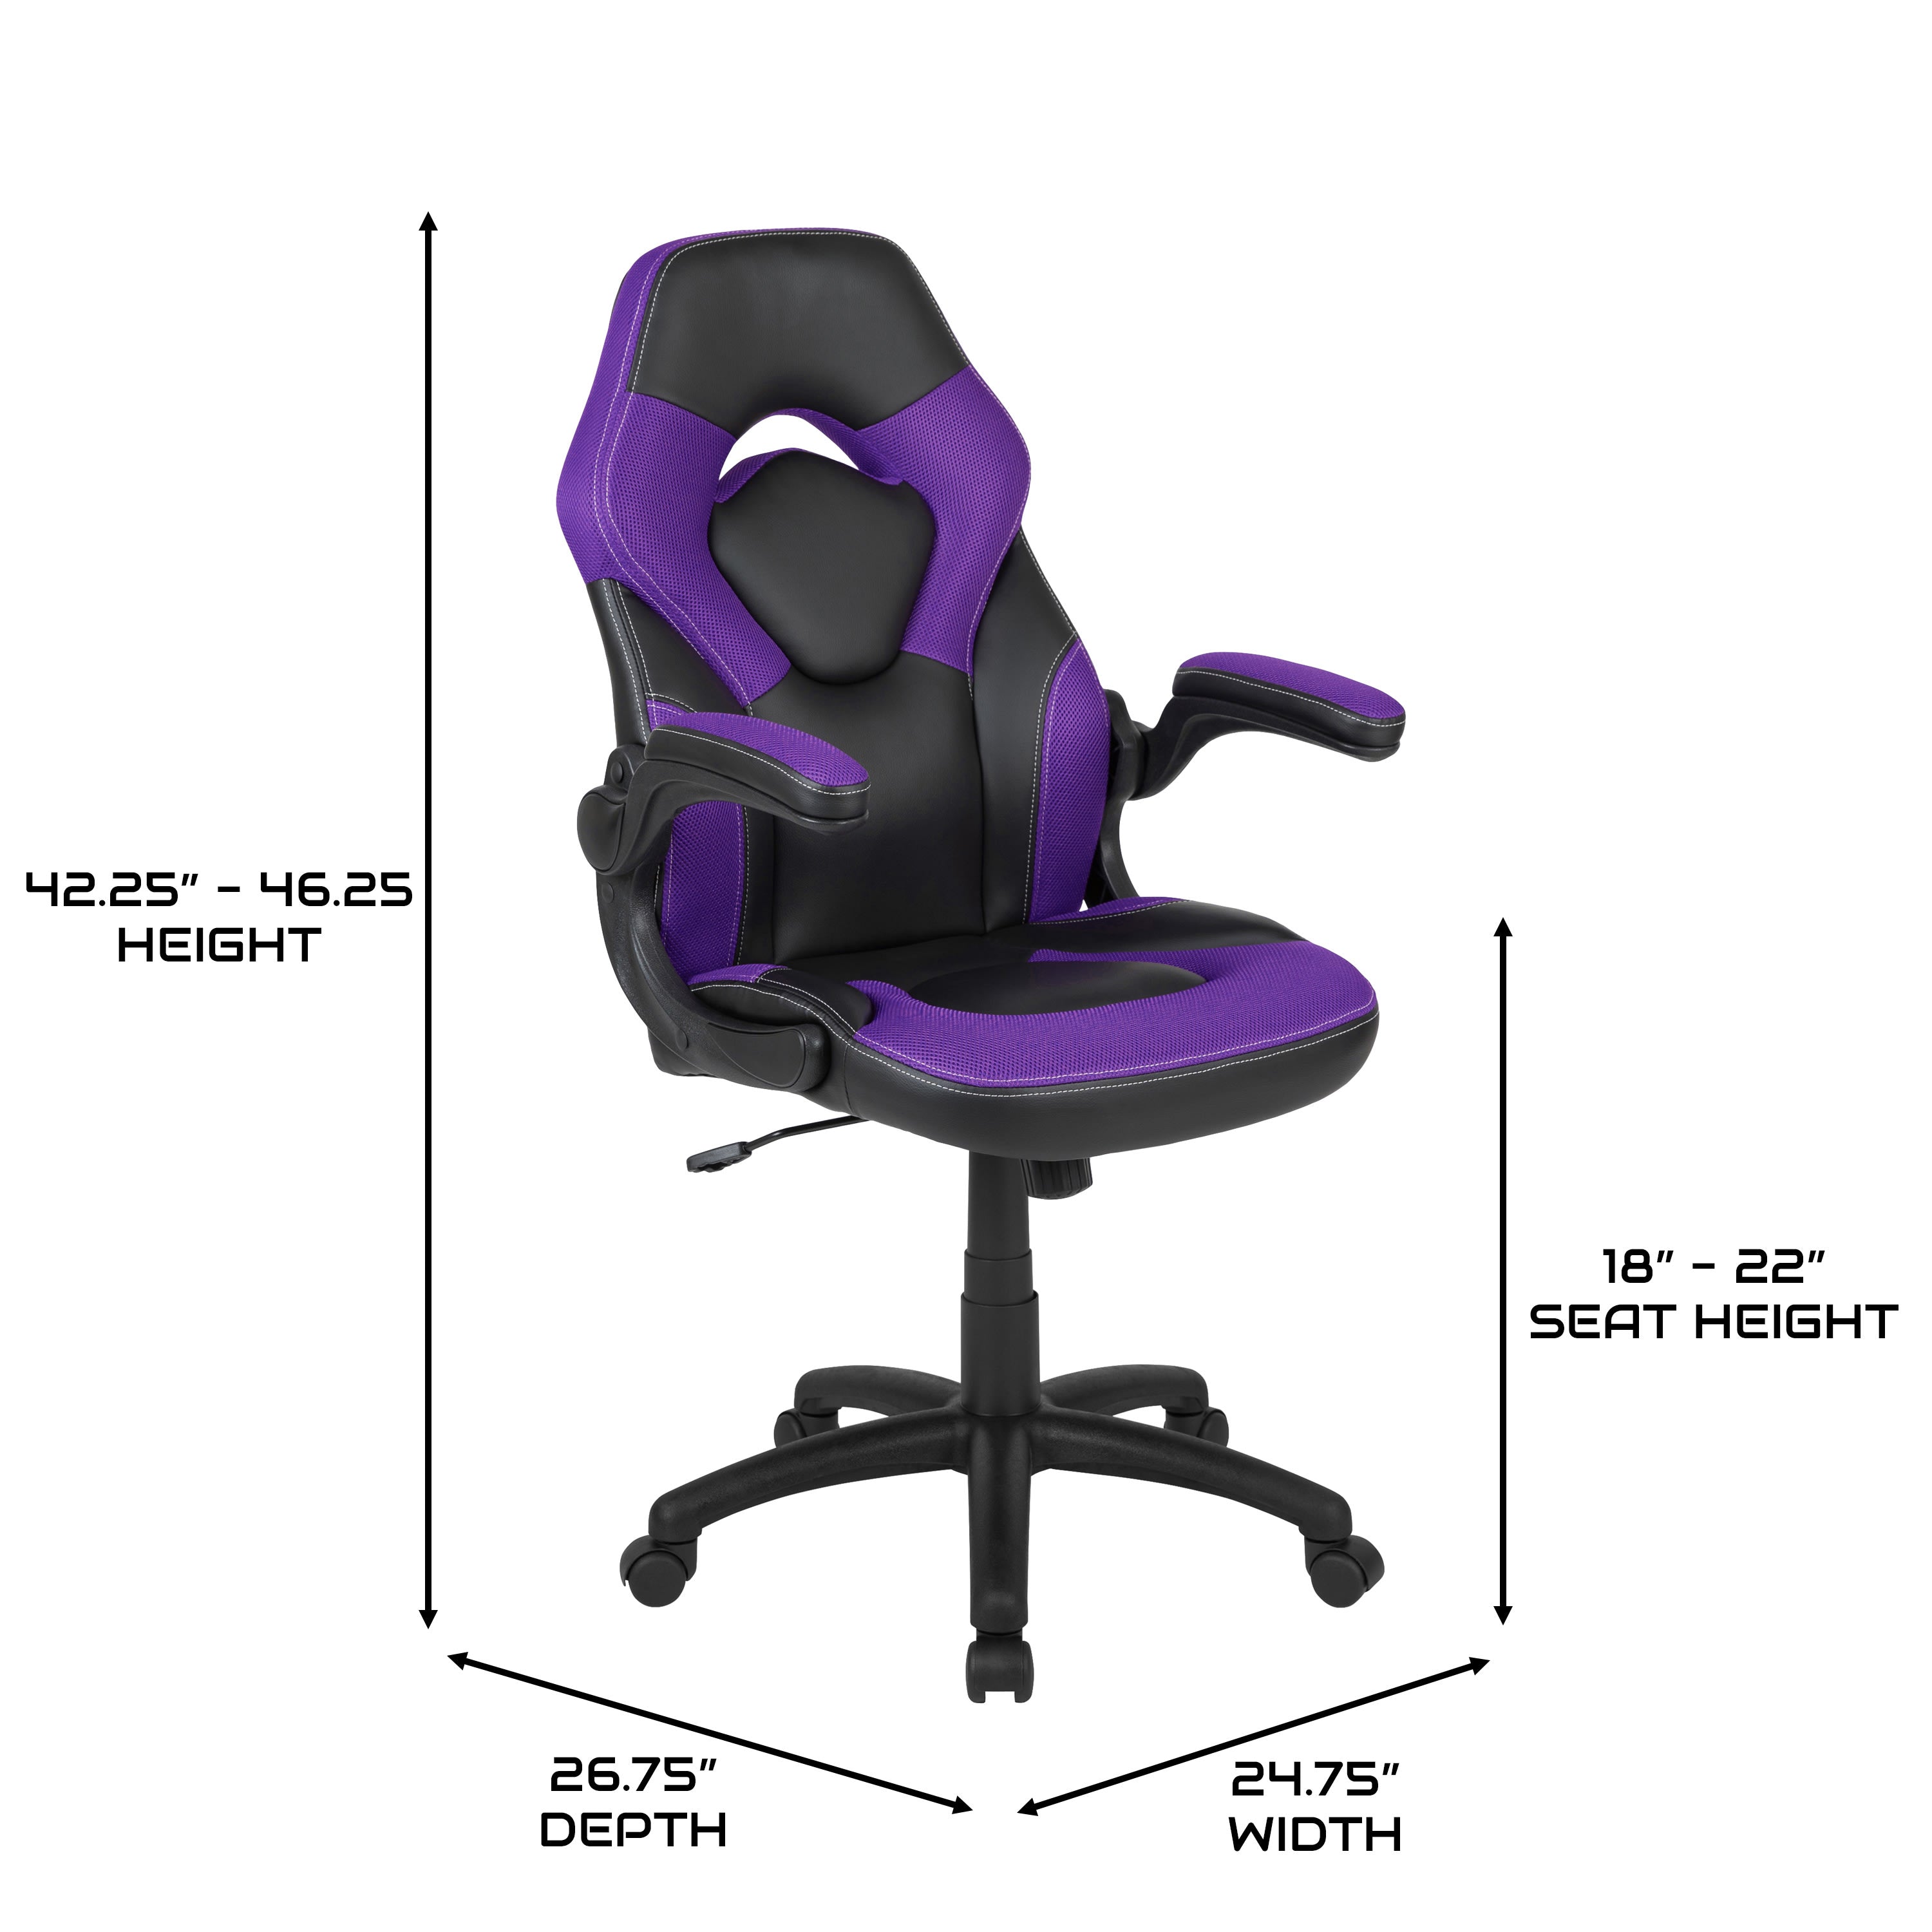 BlackArc Allegiance 1 High Back Gaming Chair with Faux Leather Upholstery,  Height Adjustable Swivel Seat & Padded Flip-Up Arms